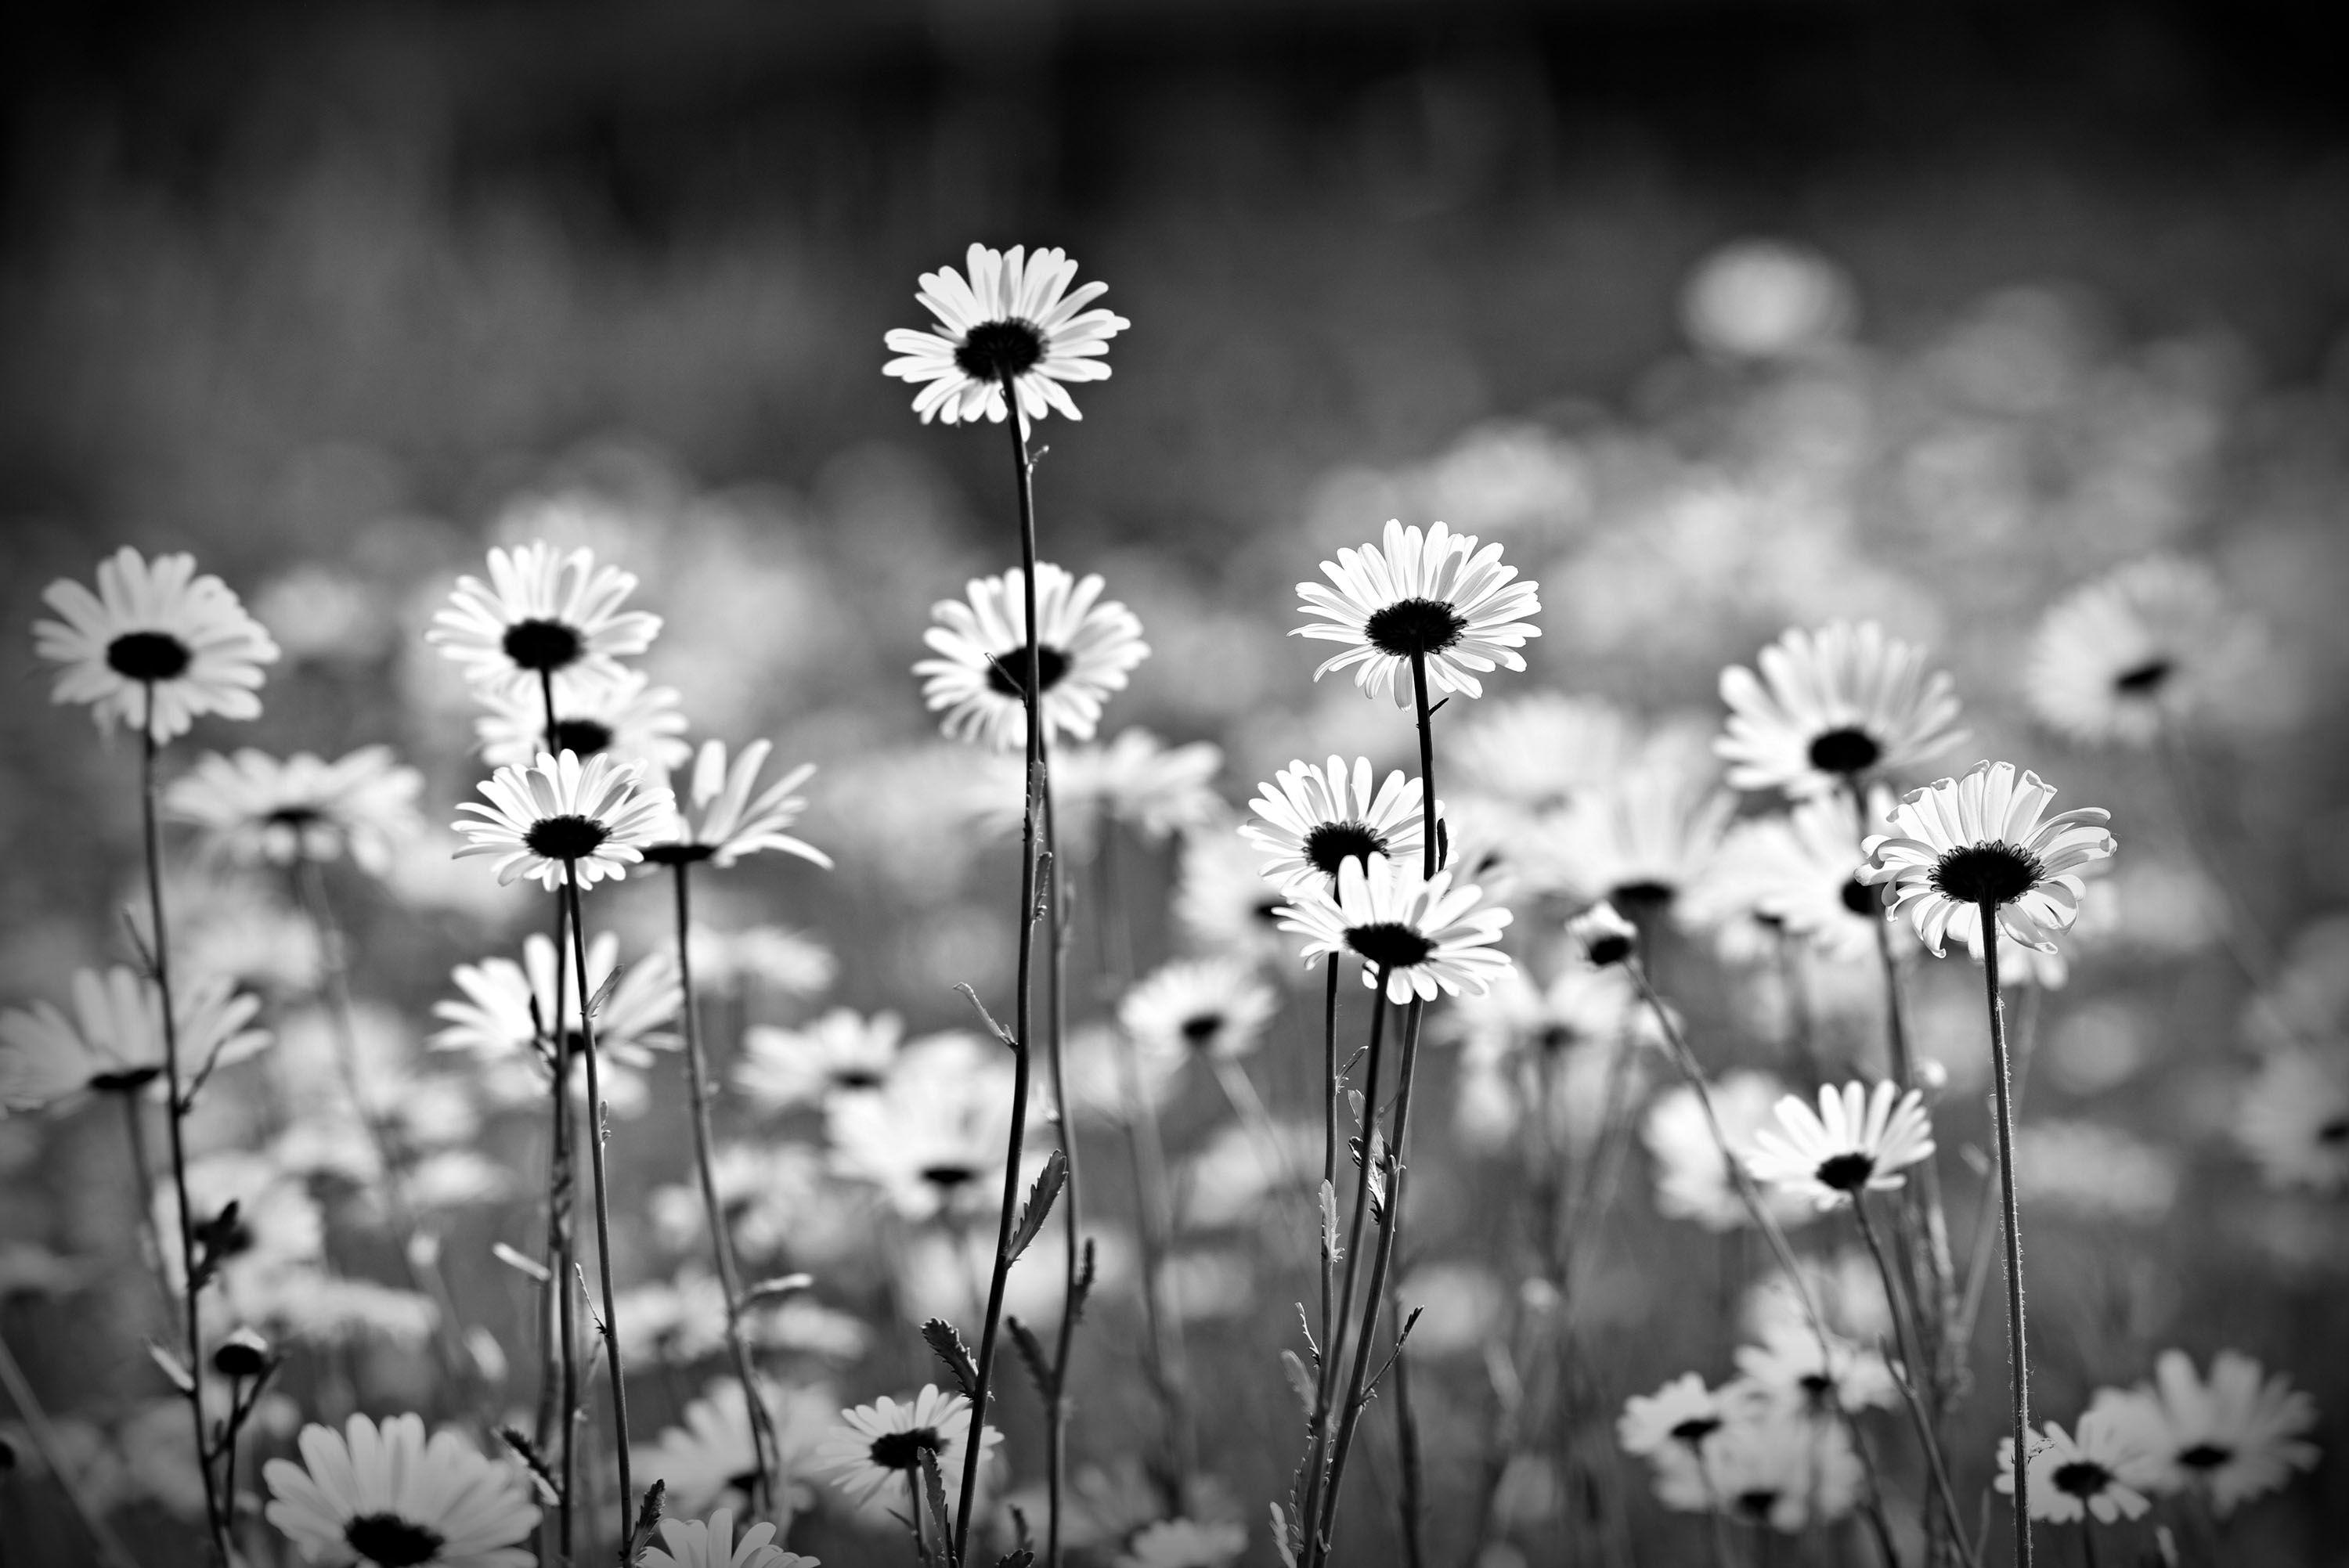 Black and White Daisy Wallpaper Free Black and White